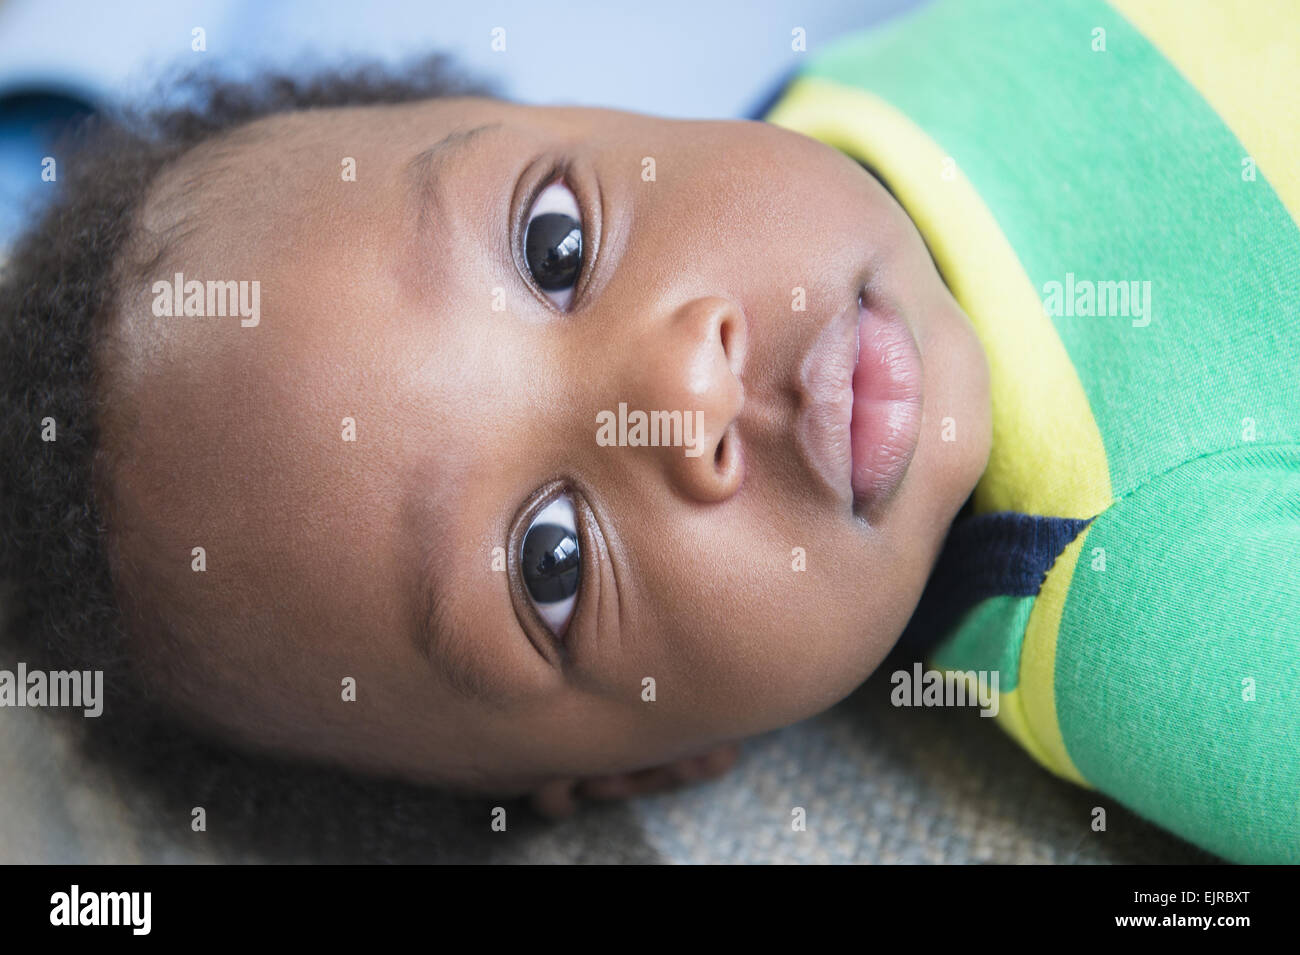 Close up of face of Black baby boy Stock Photo